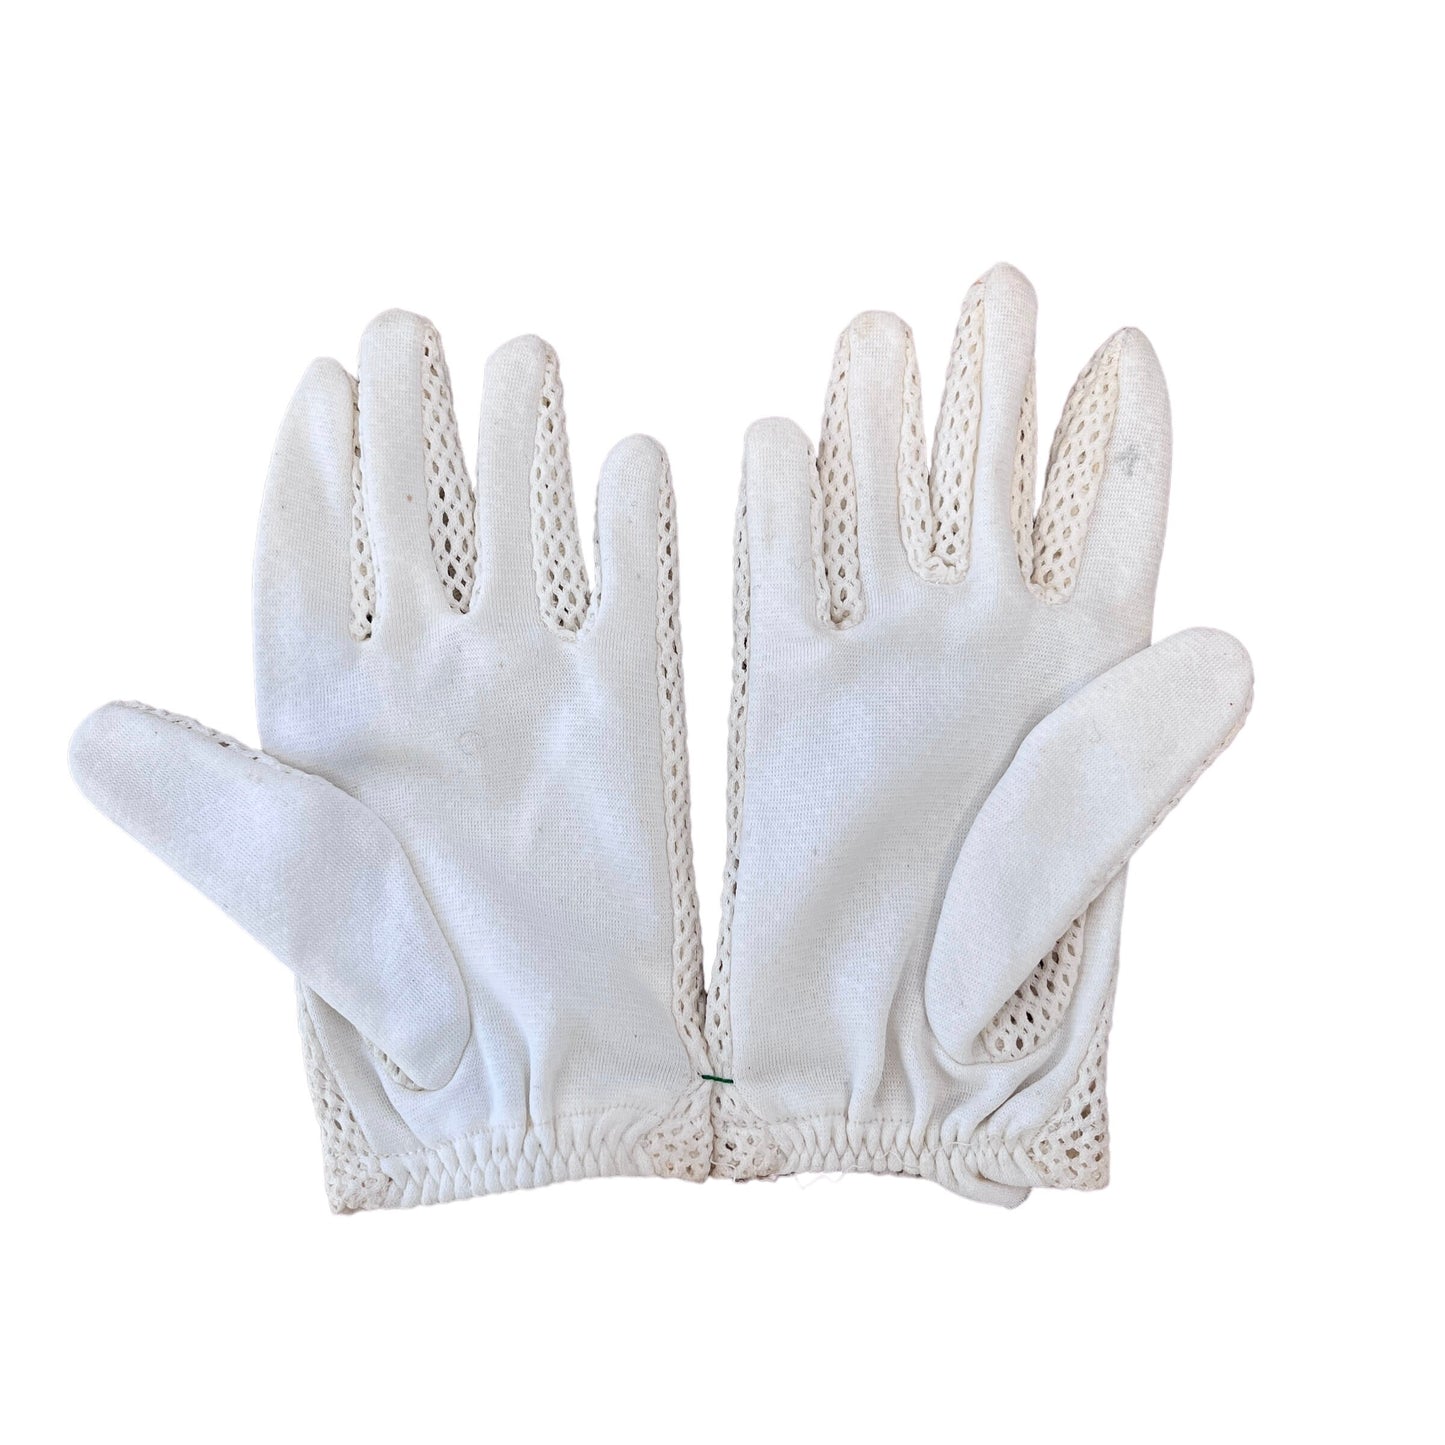 Vintage White 60s Formal Gloves from 12-24M to 3-5Y